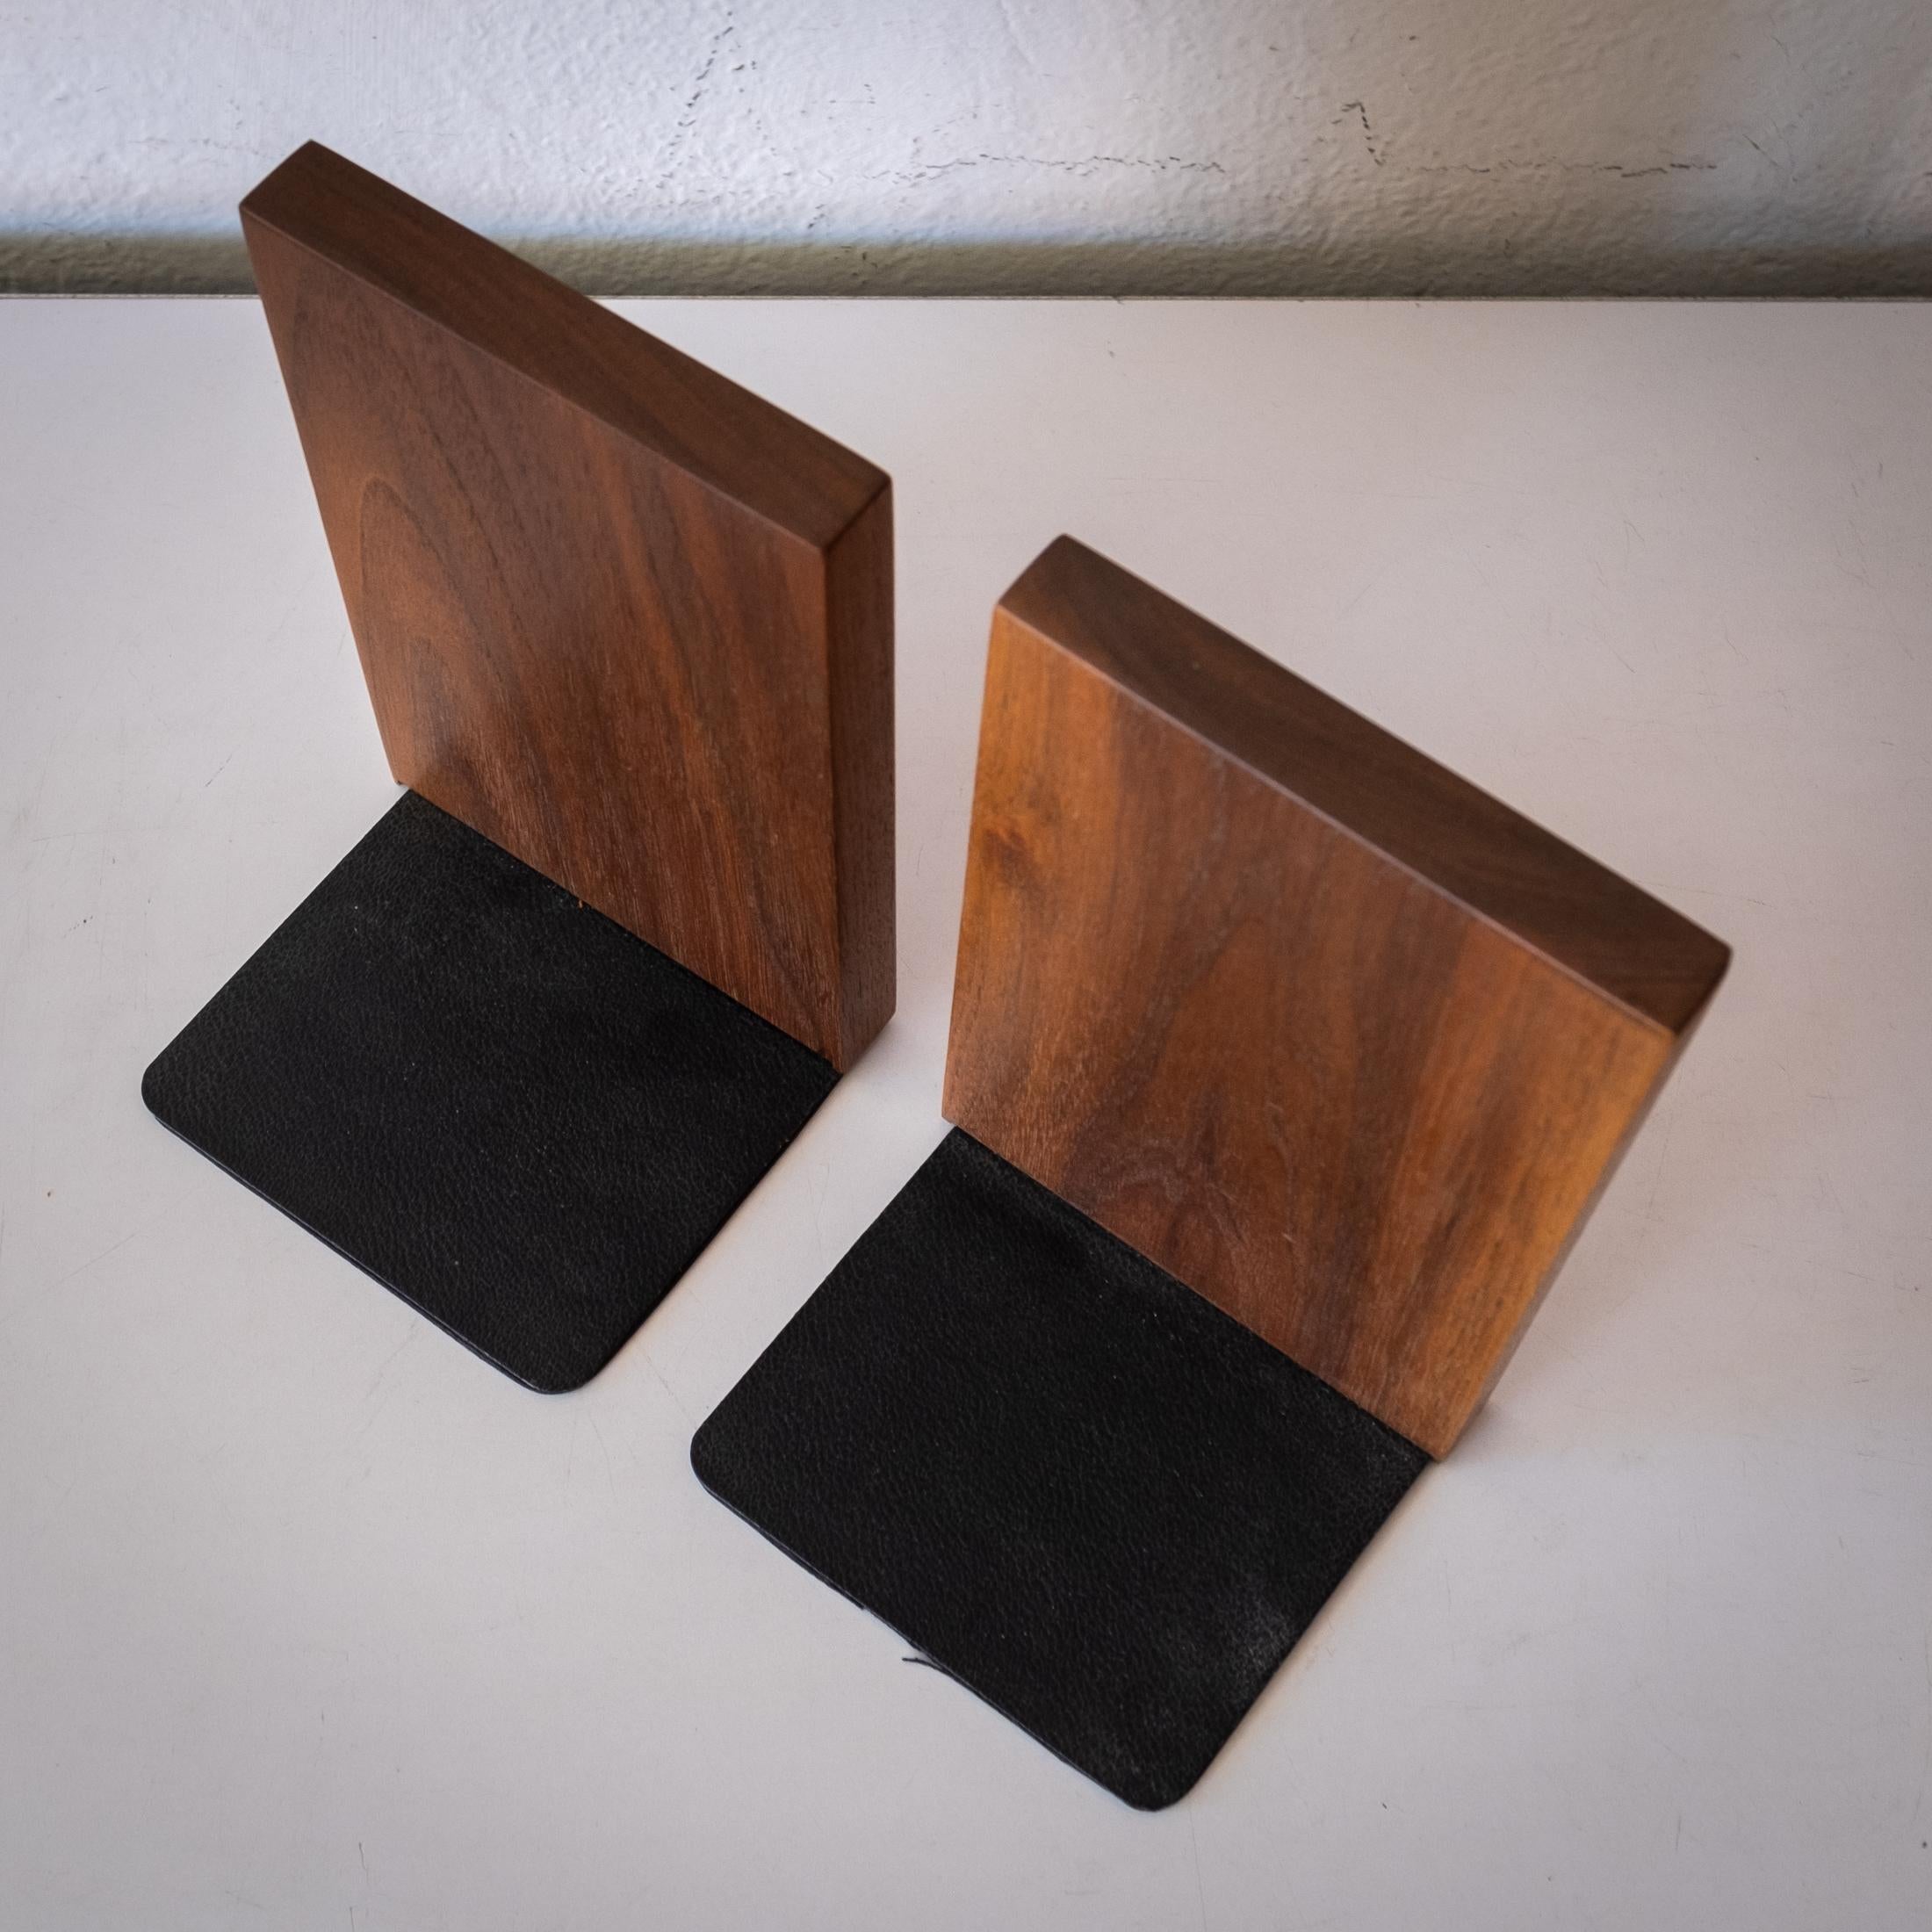 Midcentury Walnut and Ceramic Tile and Bookends 2